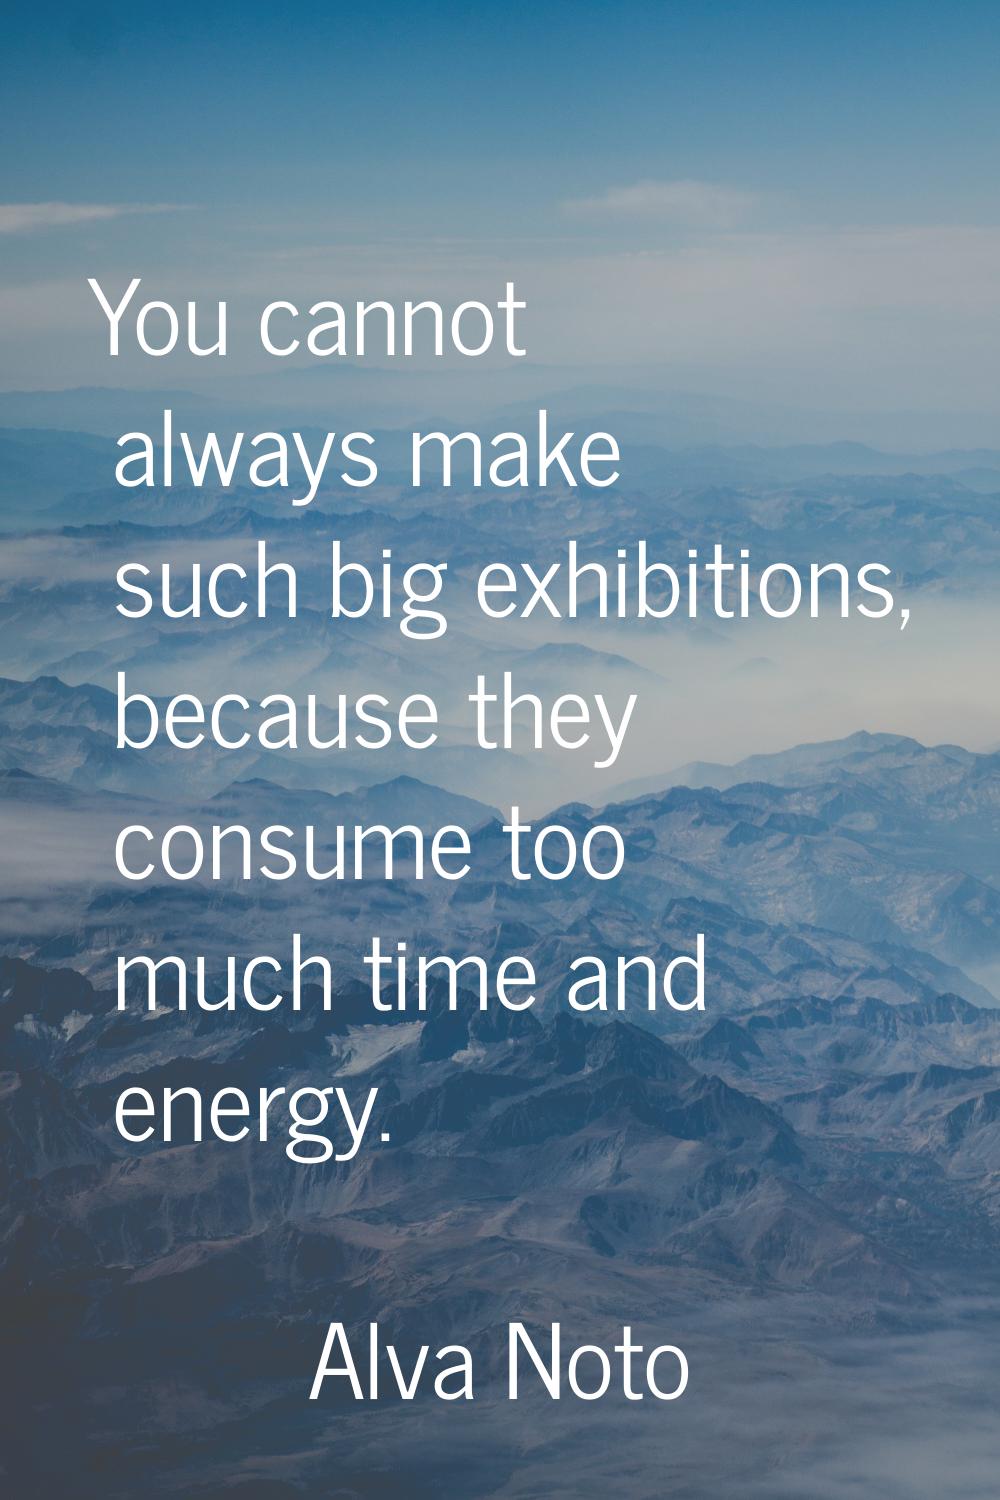 You cannot always make such big exhibitions, because they consume too much time and energy.